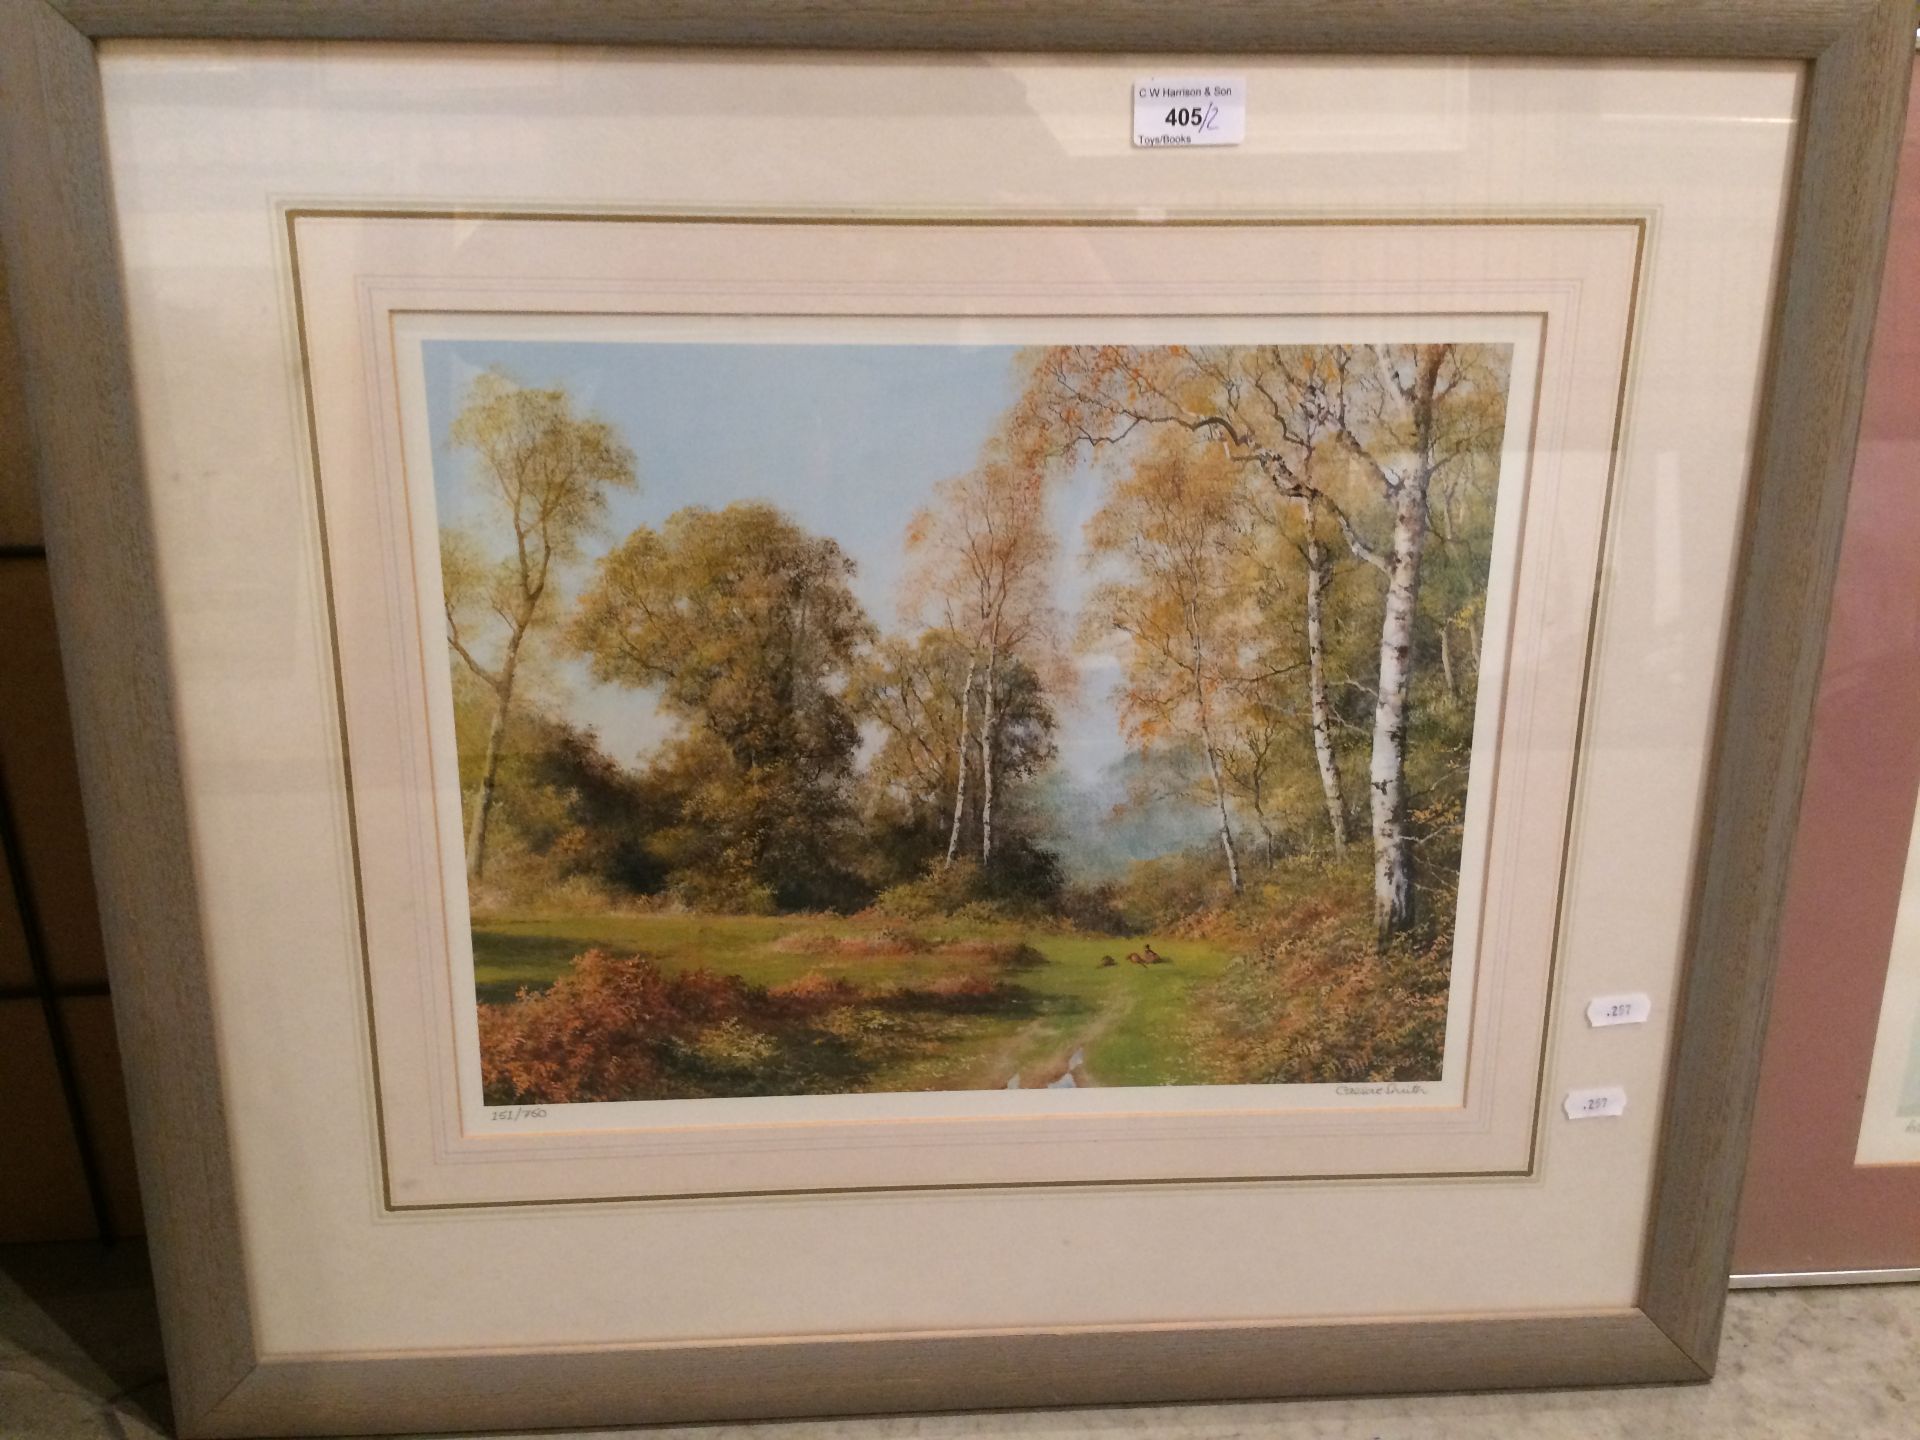 Caesar Smith framed Ltd Edition print 'Partridge in Woodland' 32 x 40cm signed in pencil and no. - Image 3 of 3